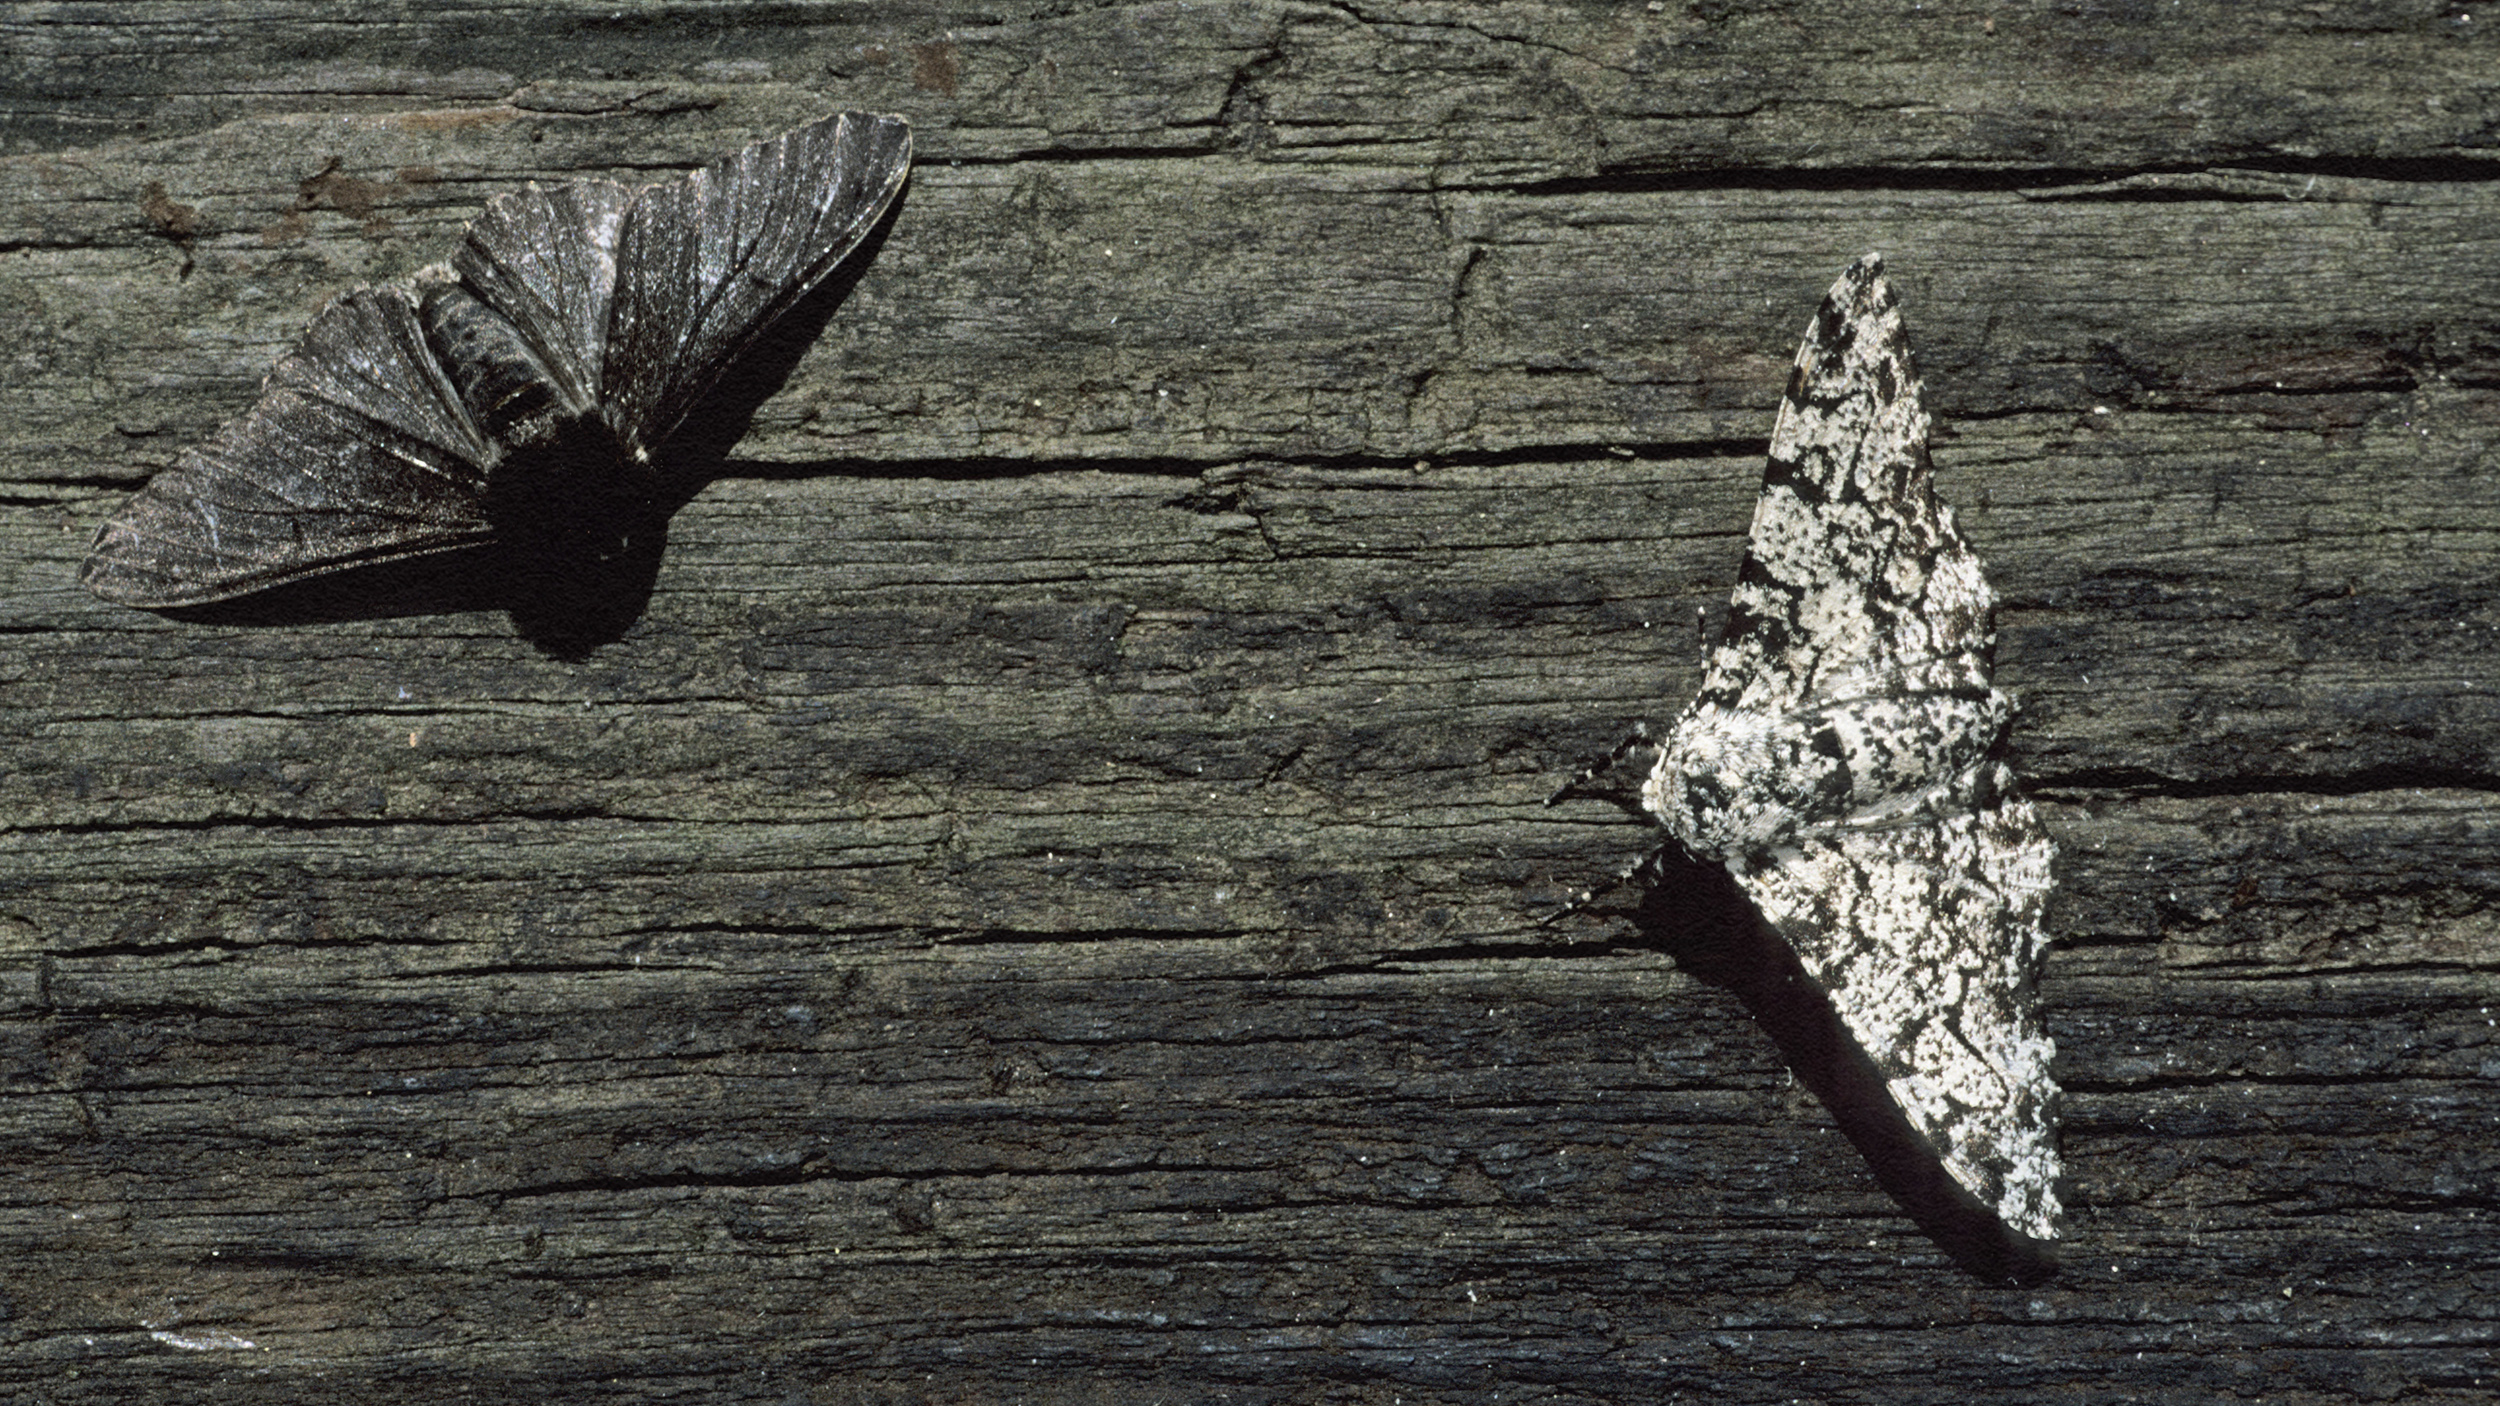 Two moths on a wooden surface in anthropogenic earth.